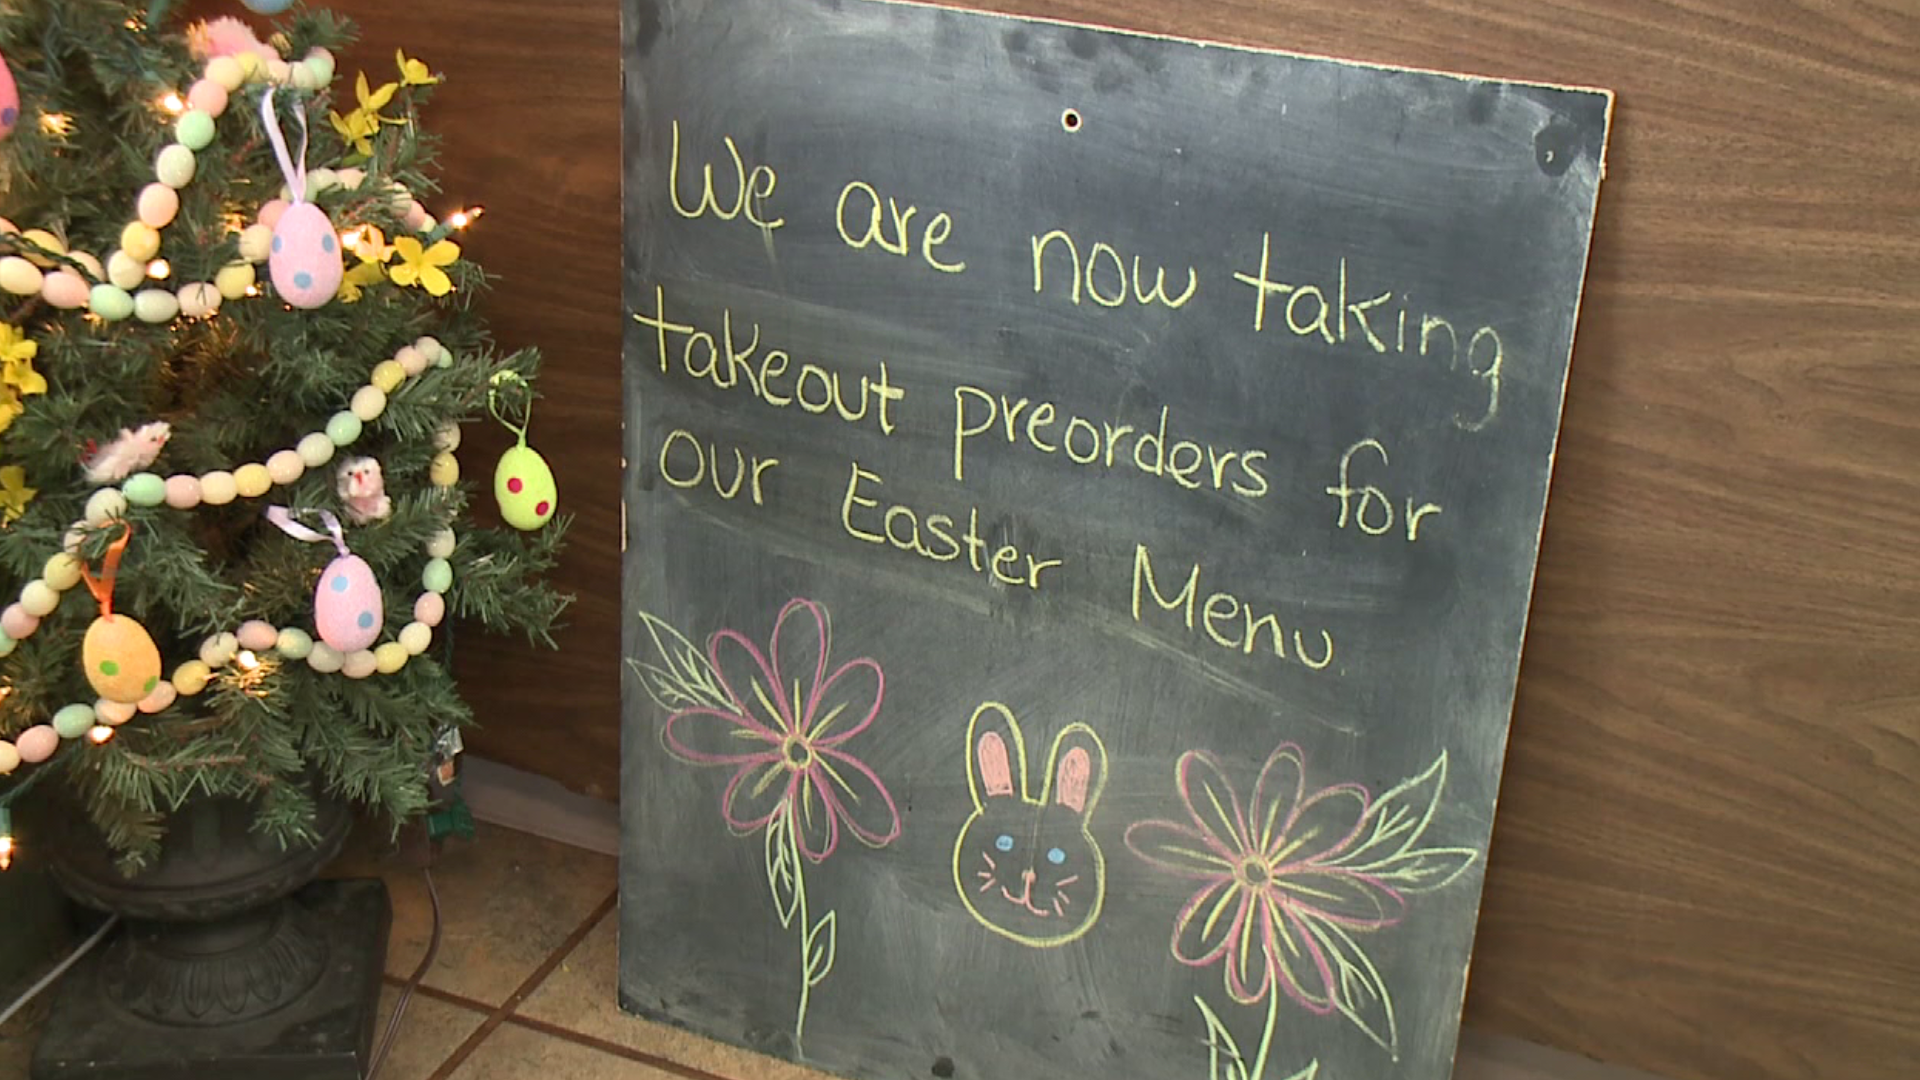 Restaurants and patrons are looking forward to the changes coming Easter Sunday.